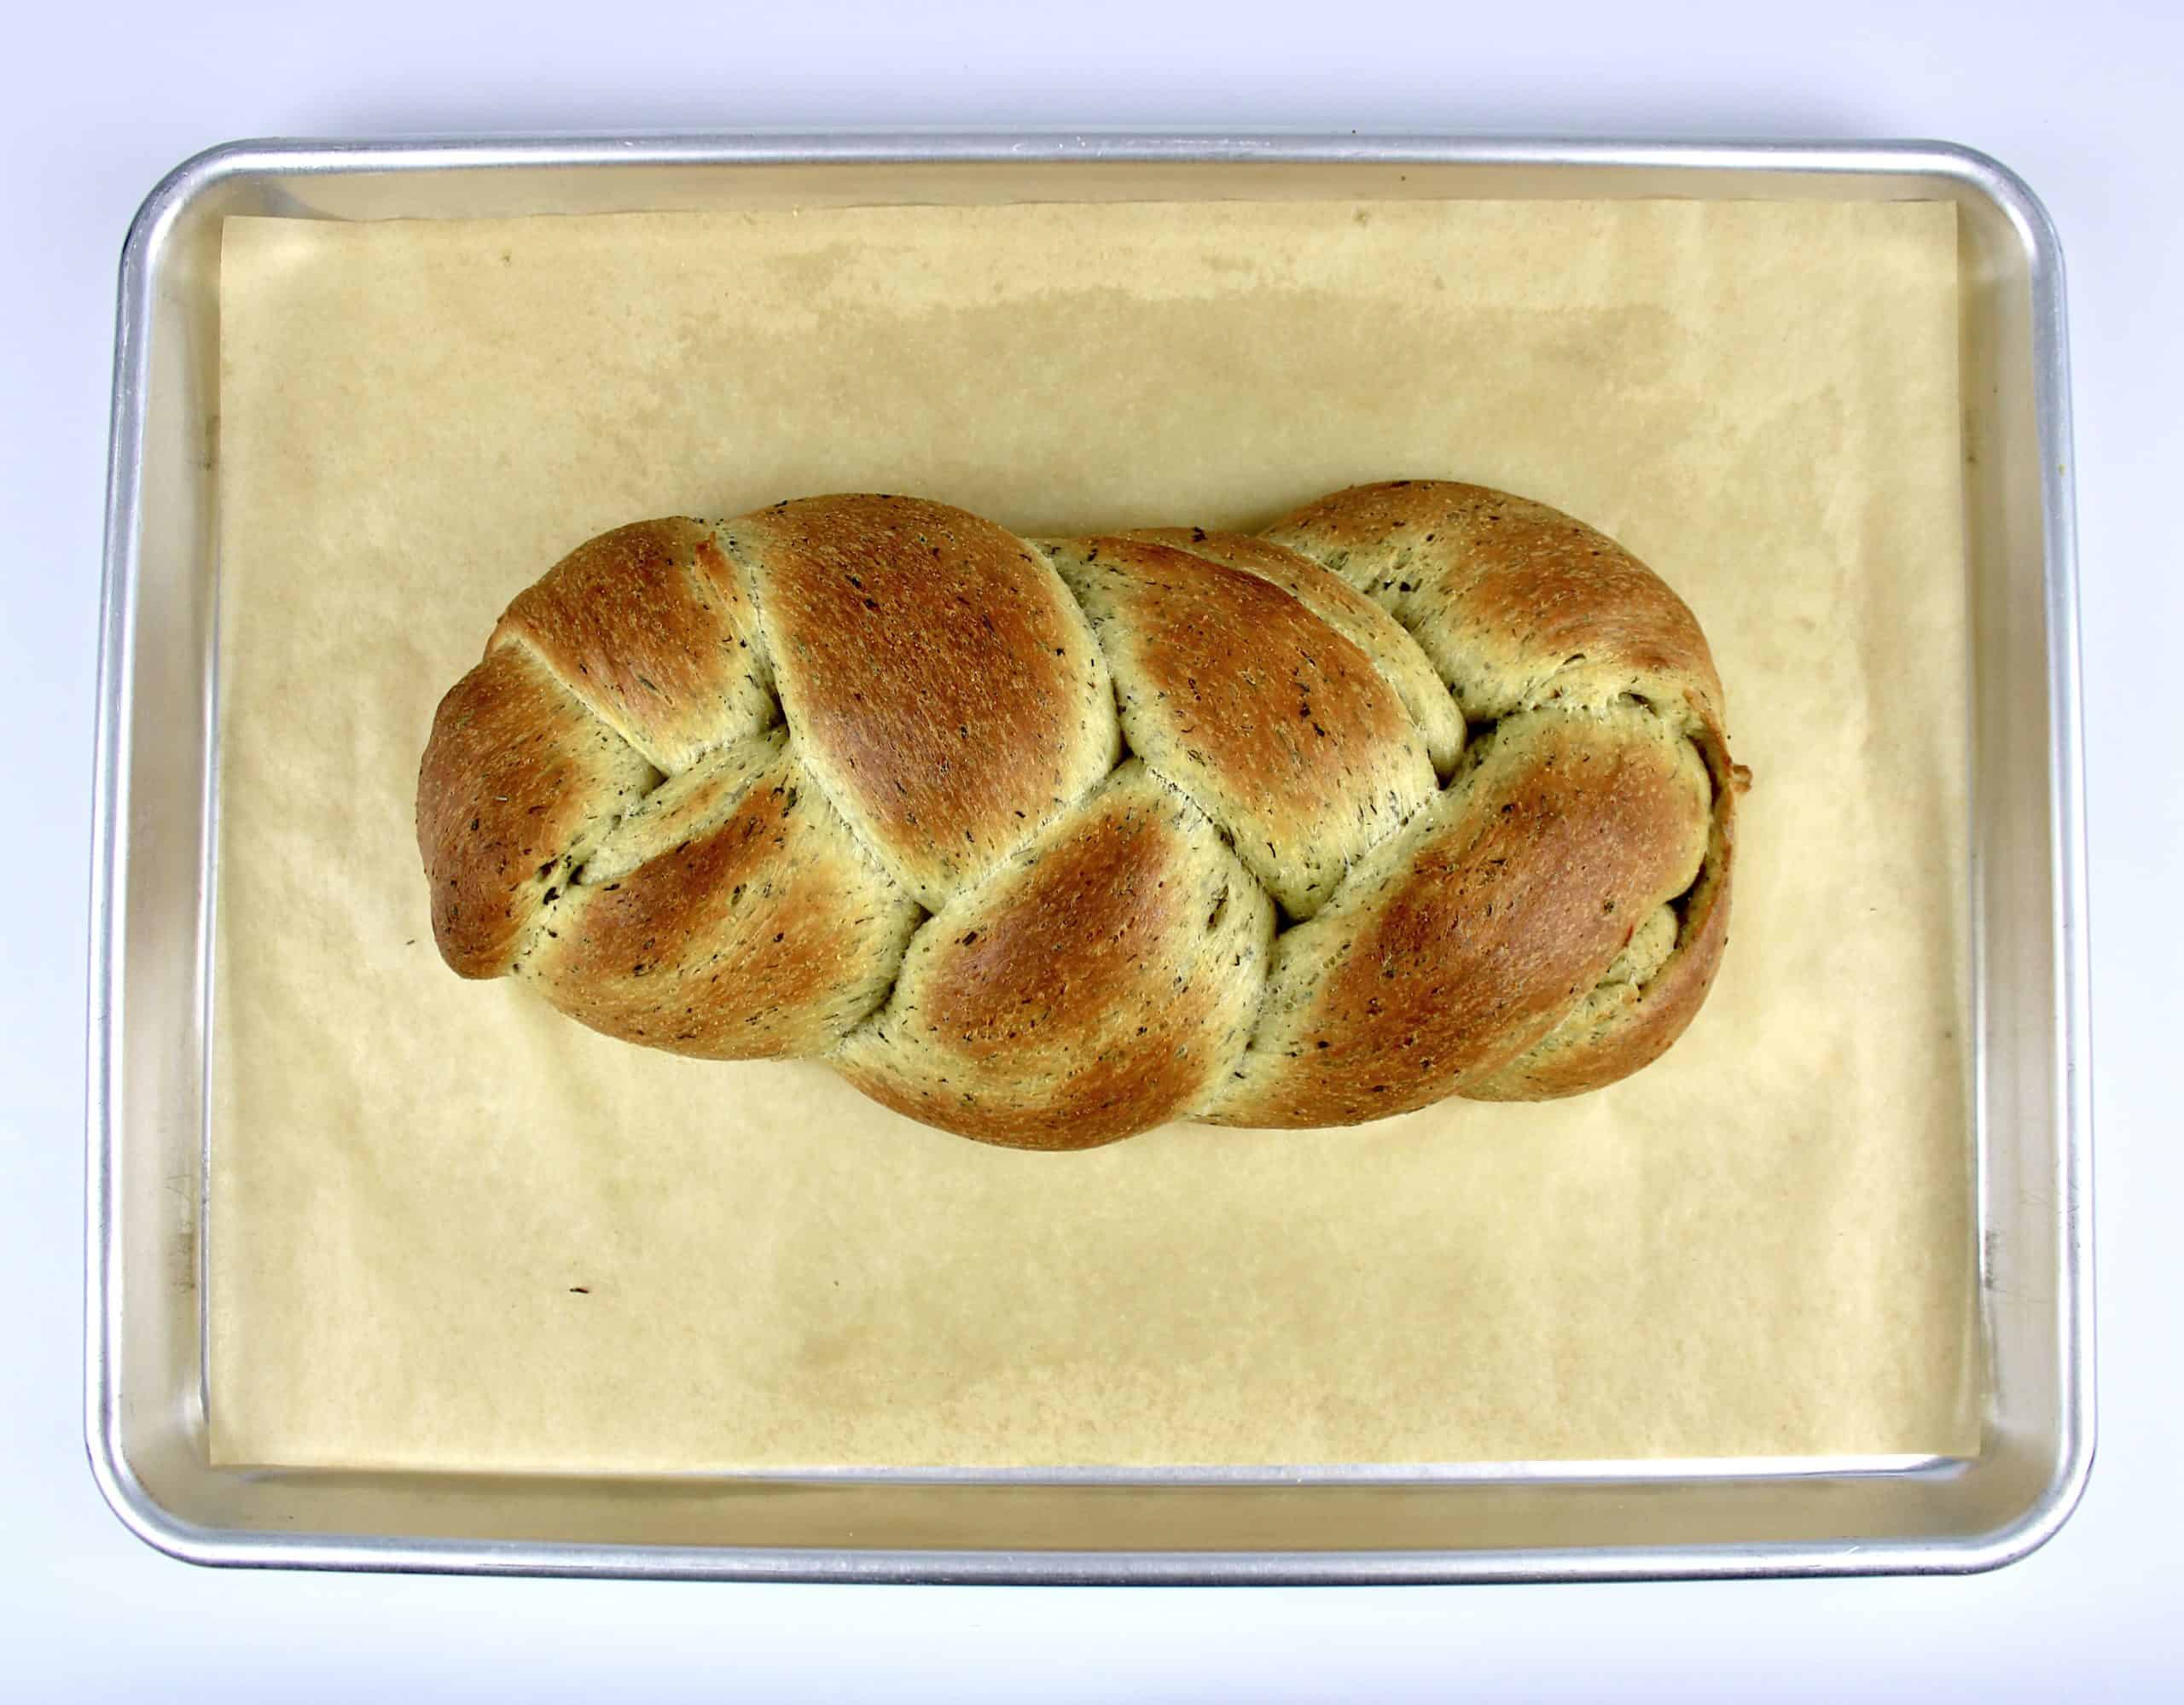 Keto Braided Herb Bread baked on baking sheet with parchment paper